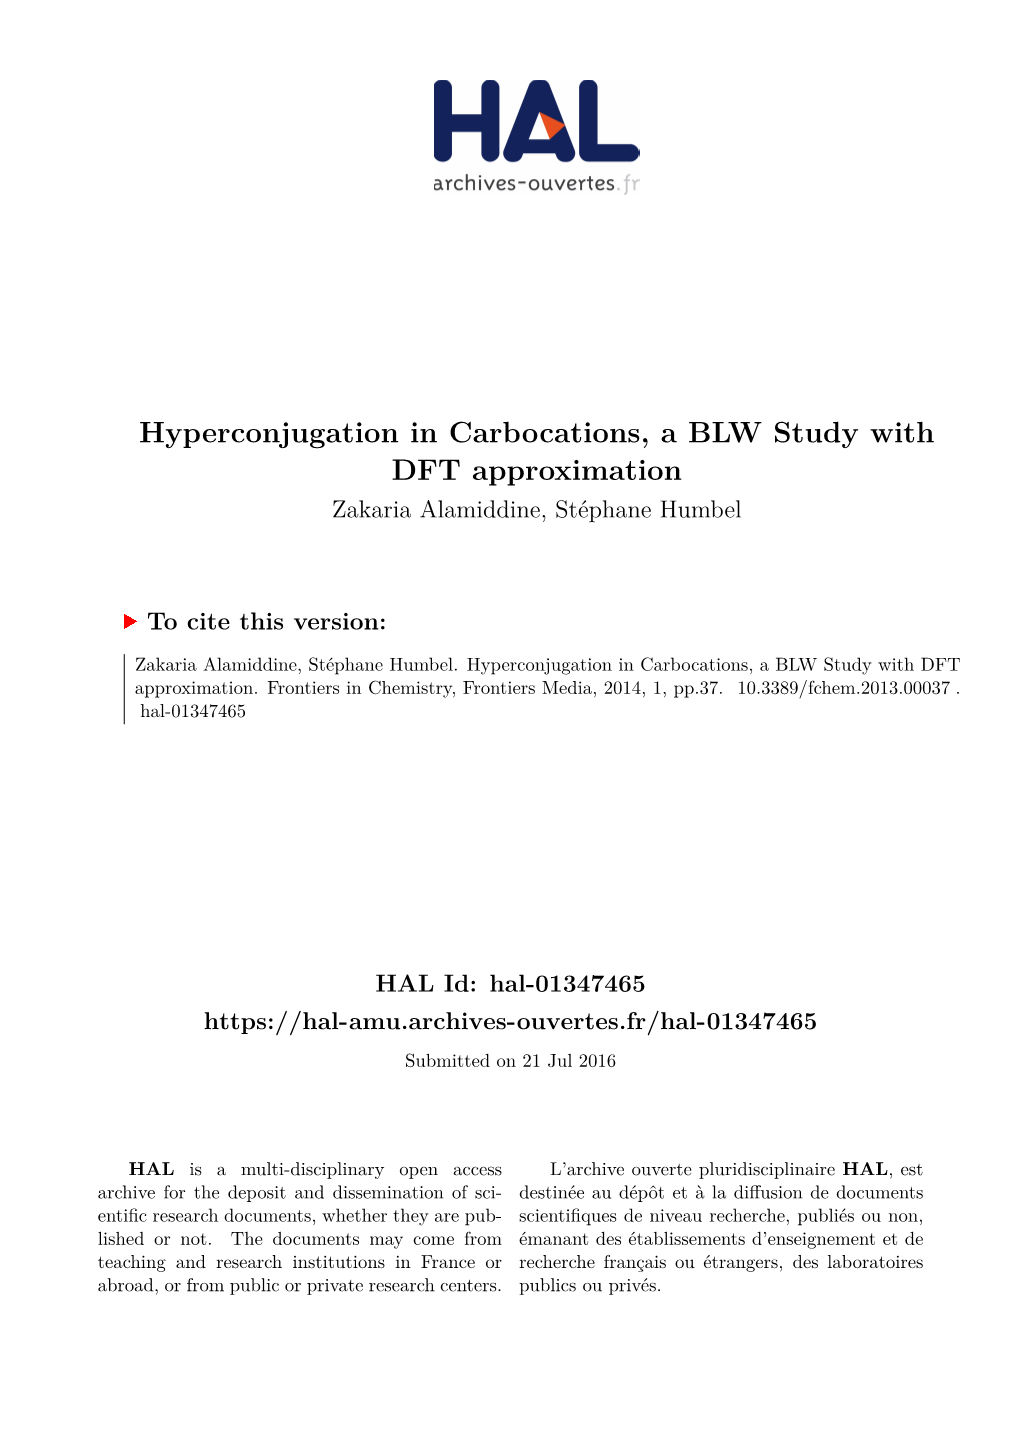 Hyperconjugation in Carbocations, a BLW Study with DFT Approximation Zakaria Alamiddine, Stéphane Humbel